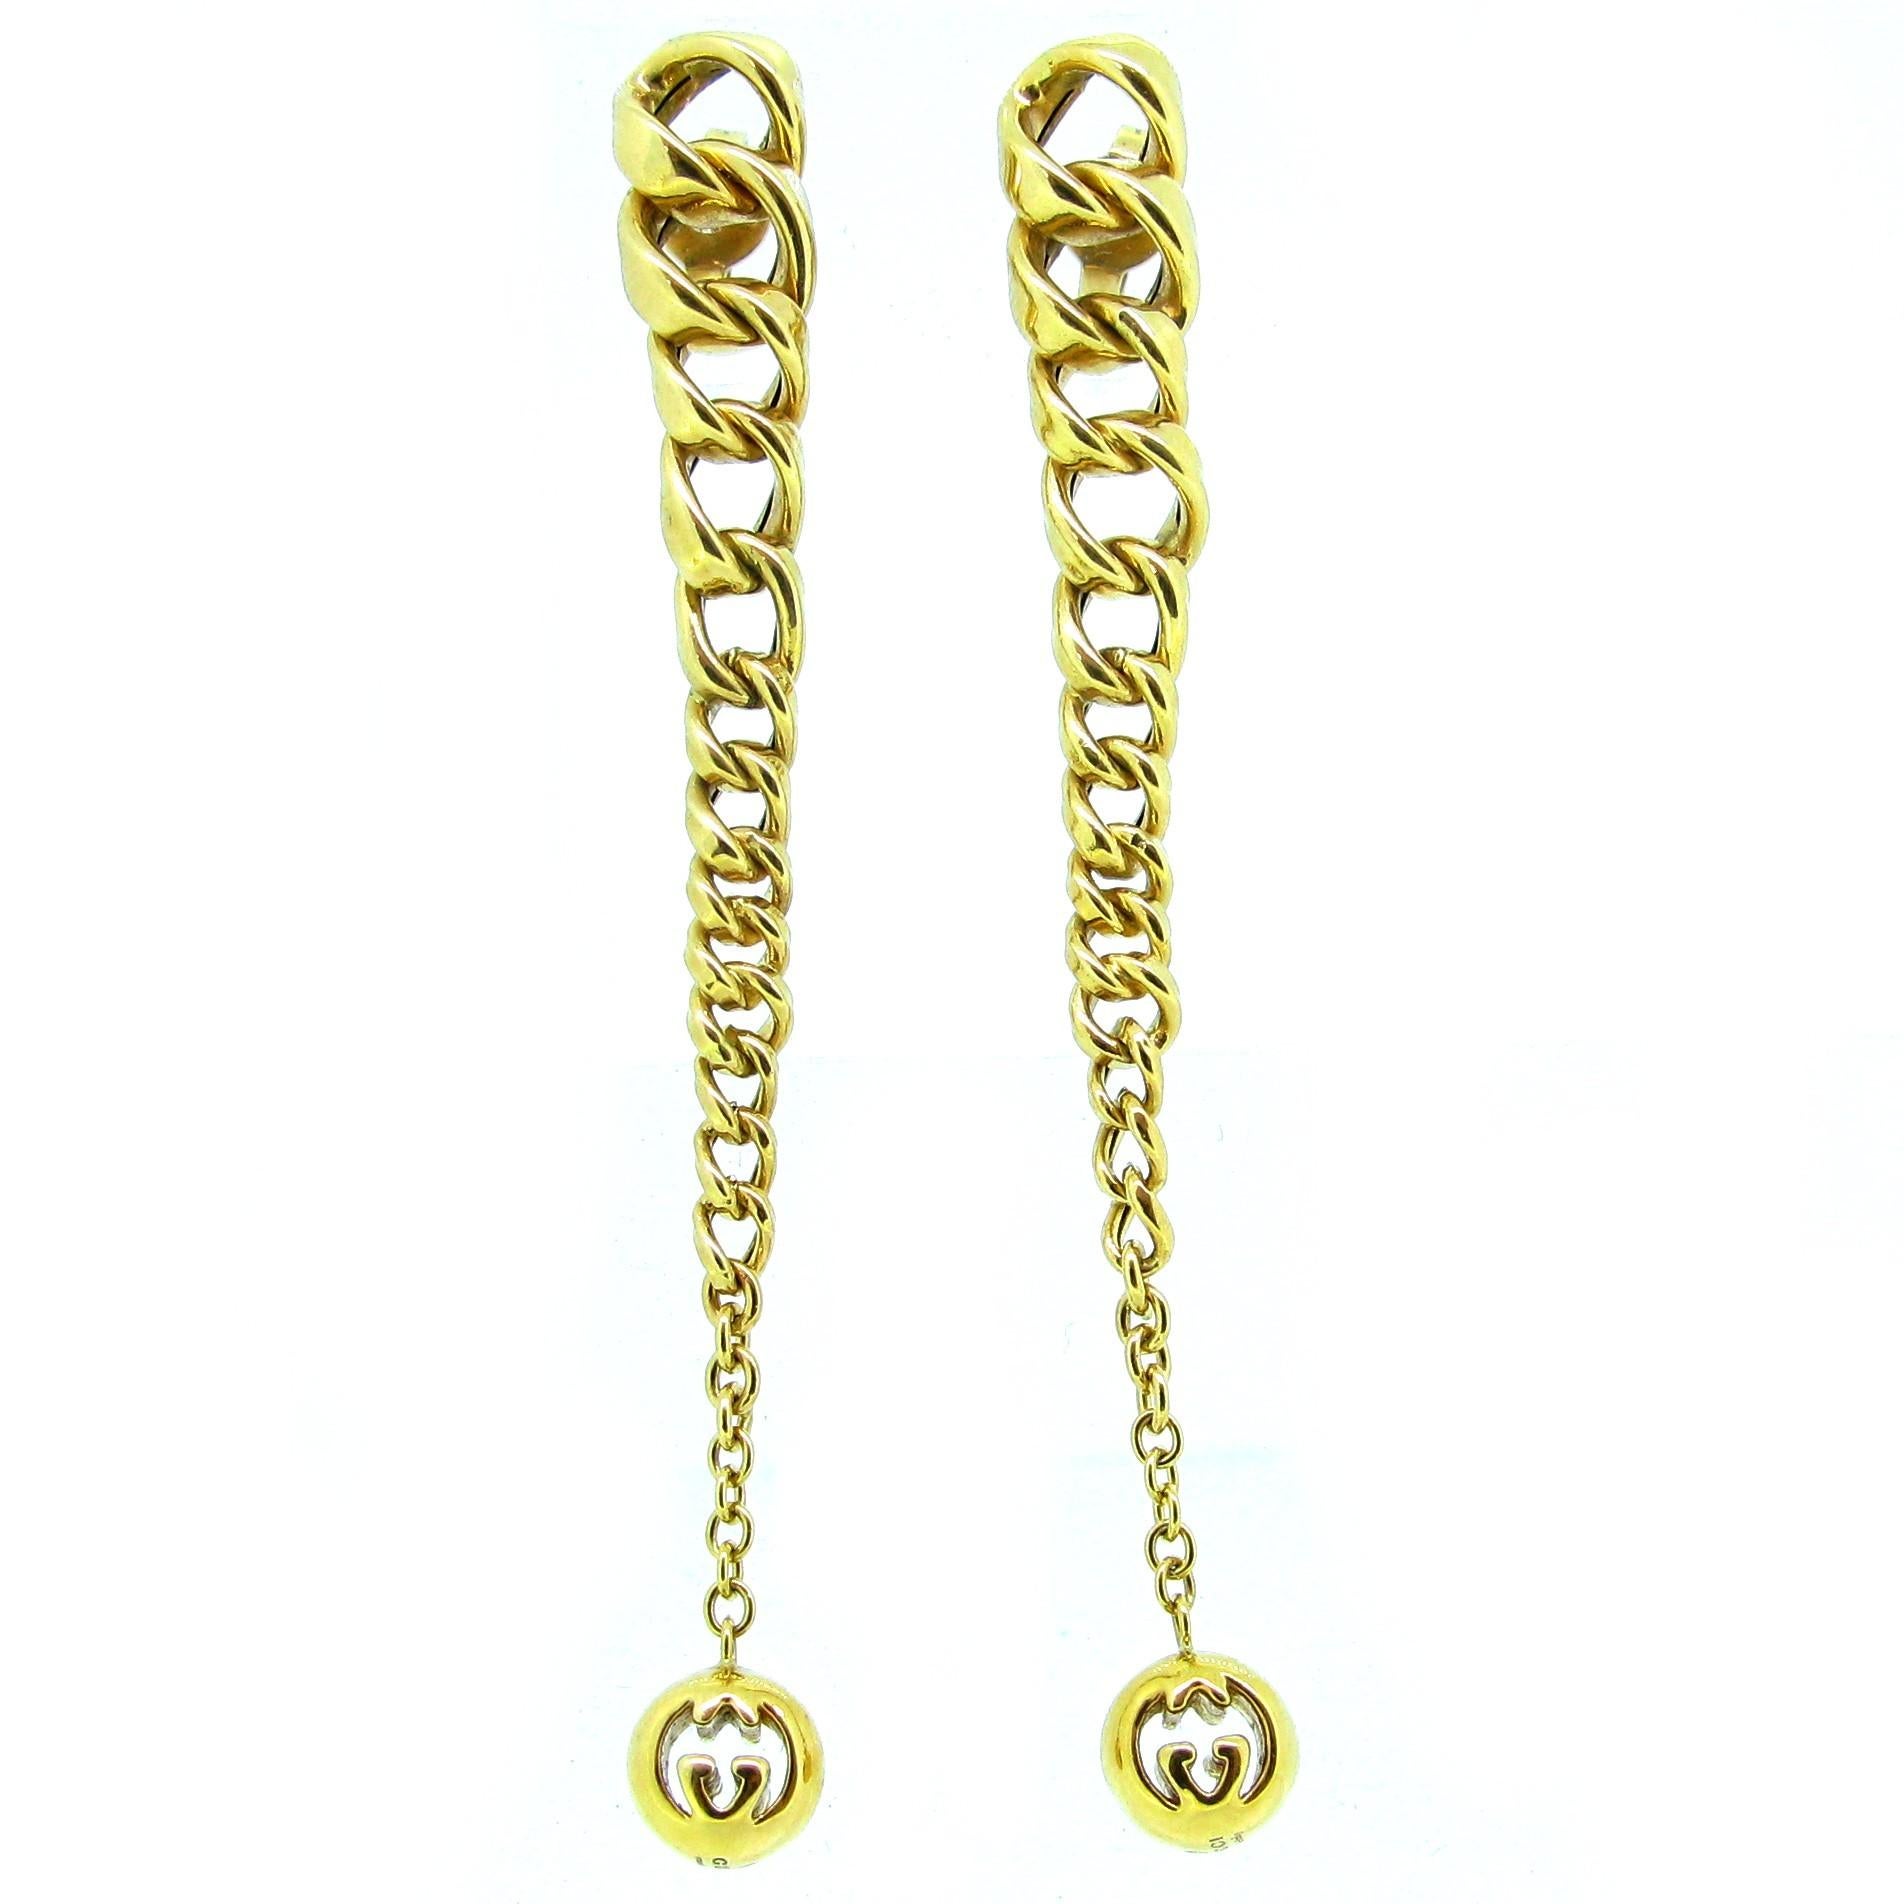 Contemporary Gucci Dangle Yellow Gold Earrings